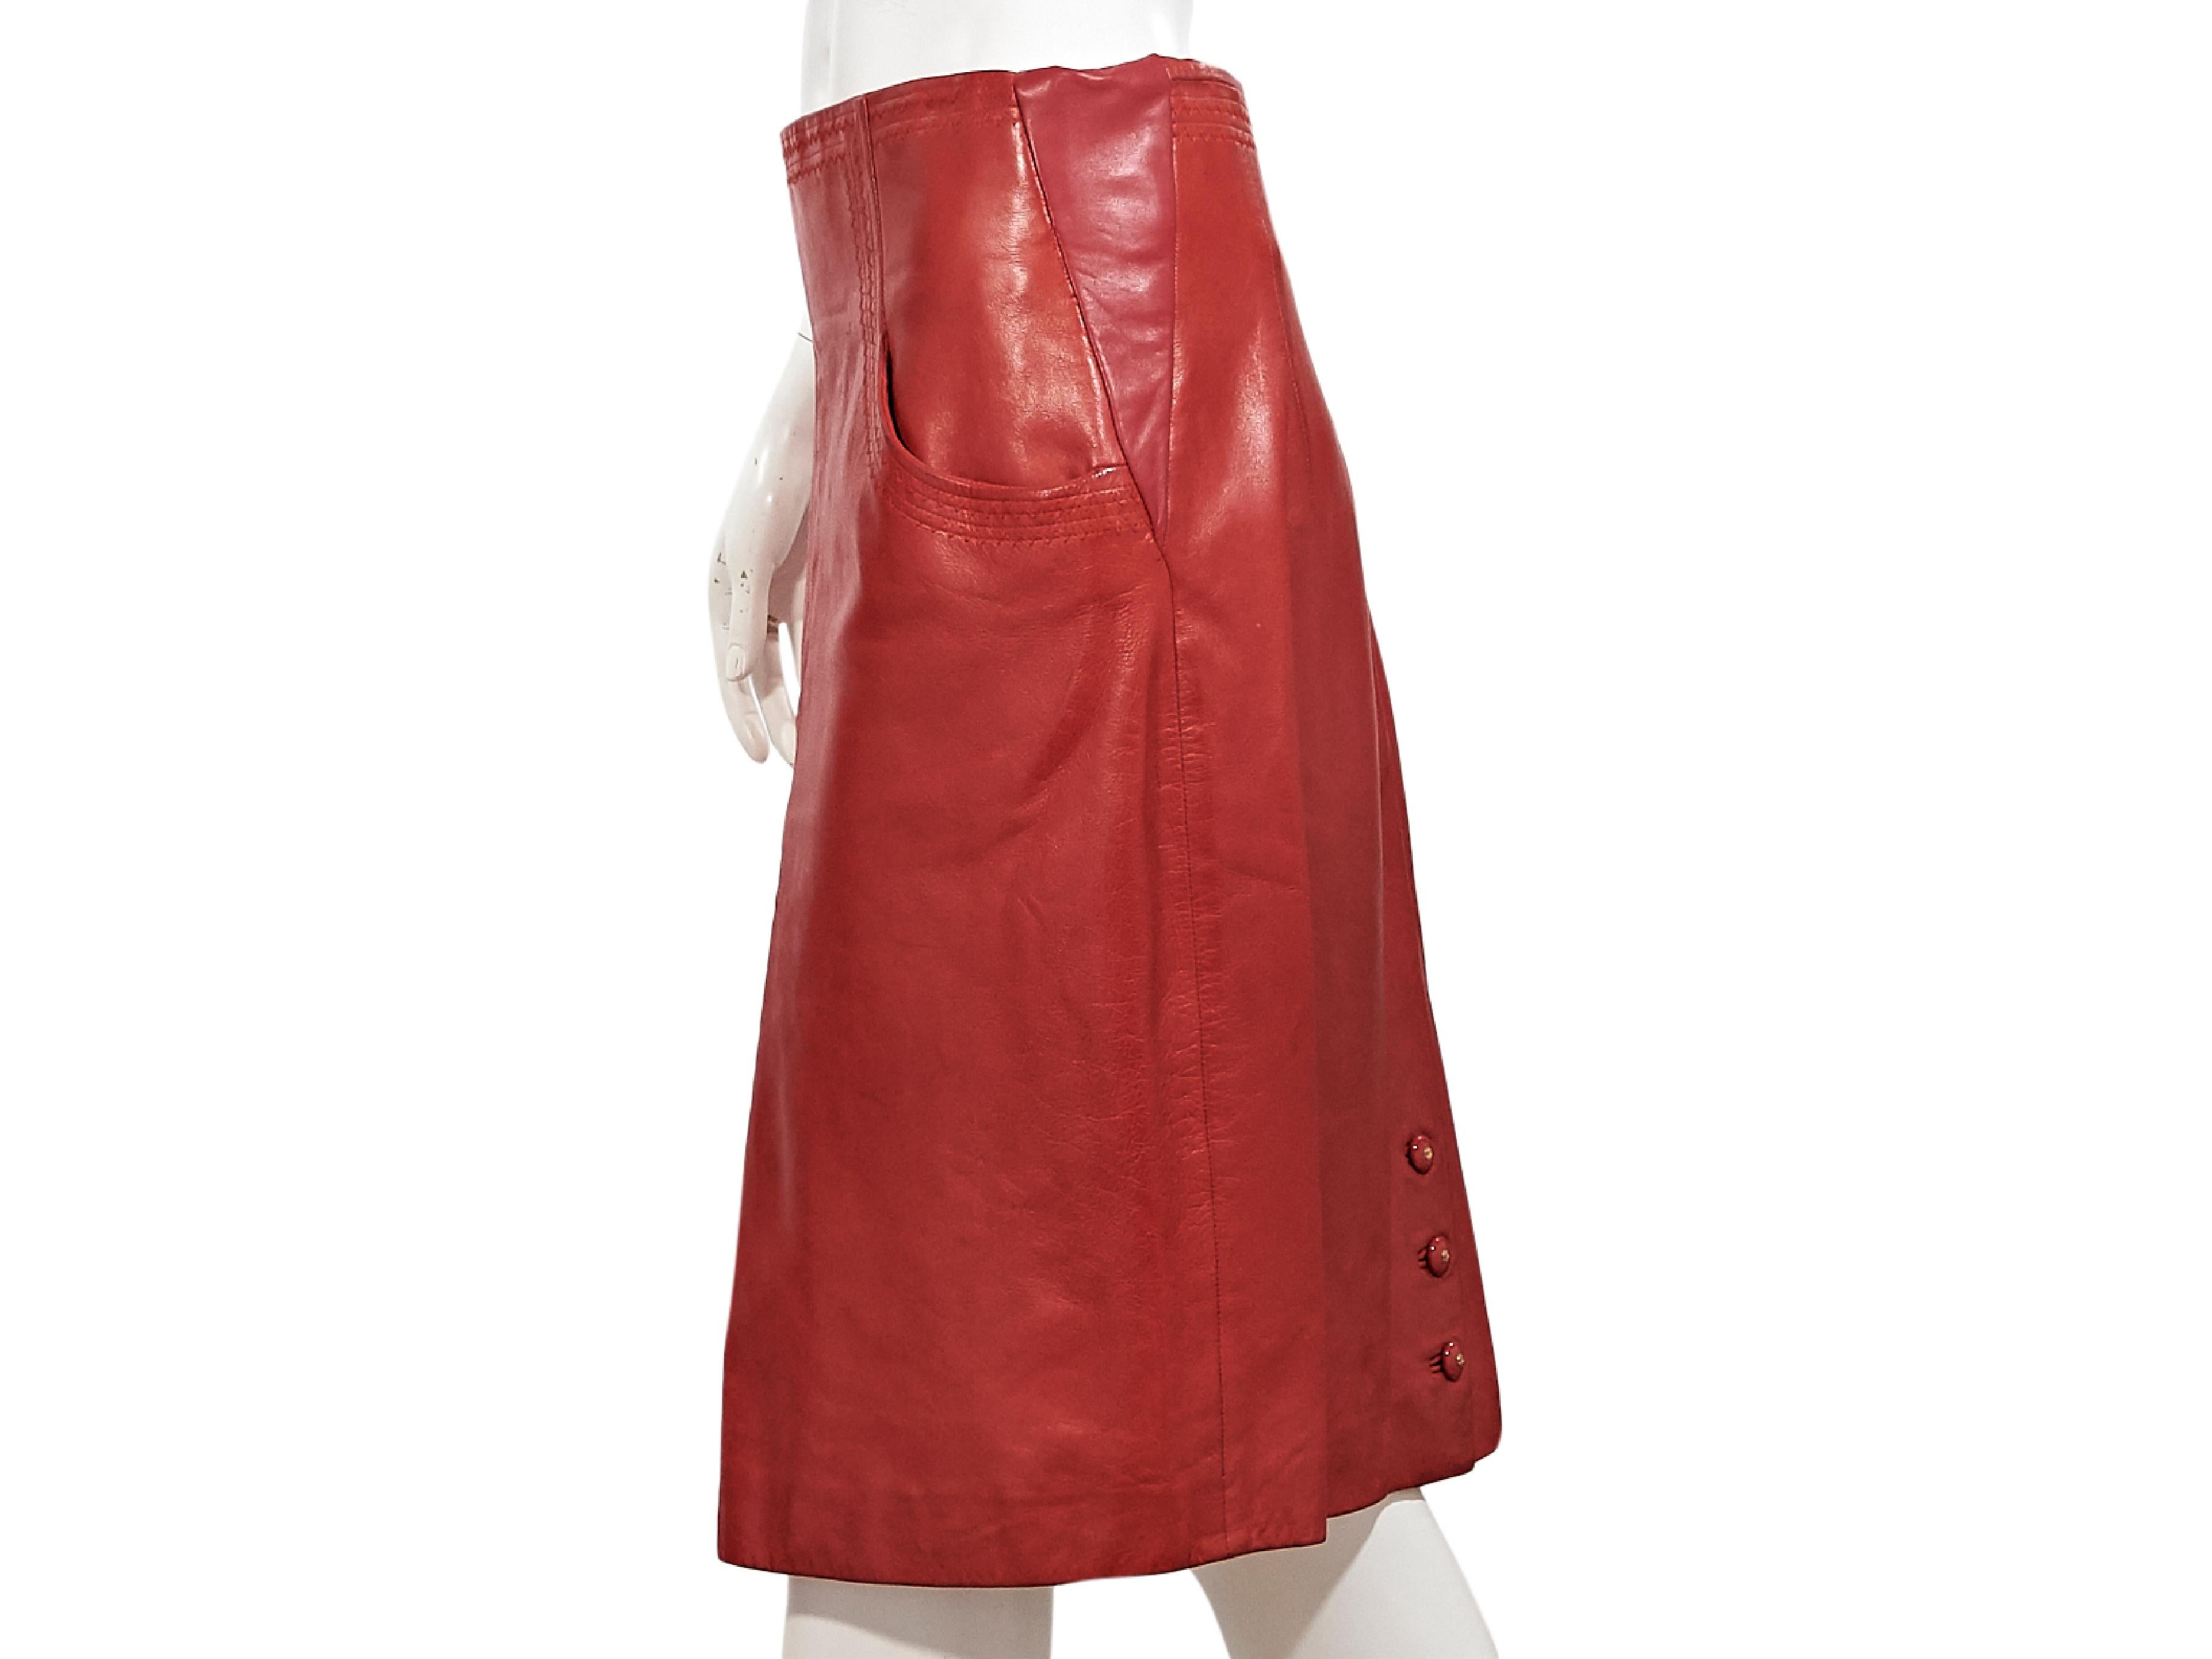 Product details:  Vintage red leather pencil skirt by Chanel.  Accented with tonal topstitching.  Waist scoop pockets.  Back zip closure.  Center back hem vent with triple-button detail.  34